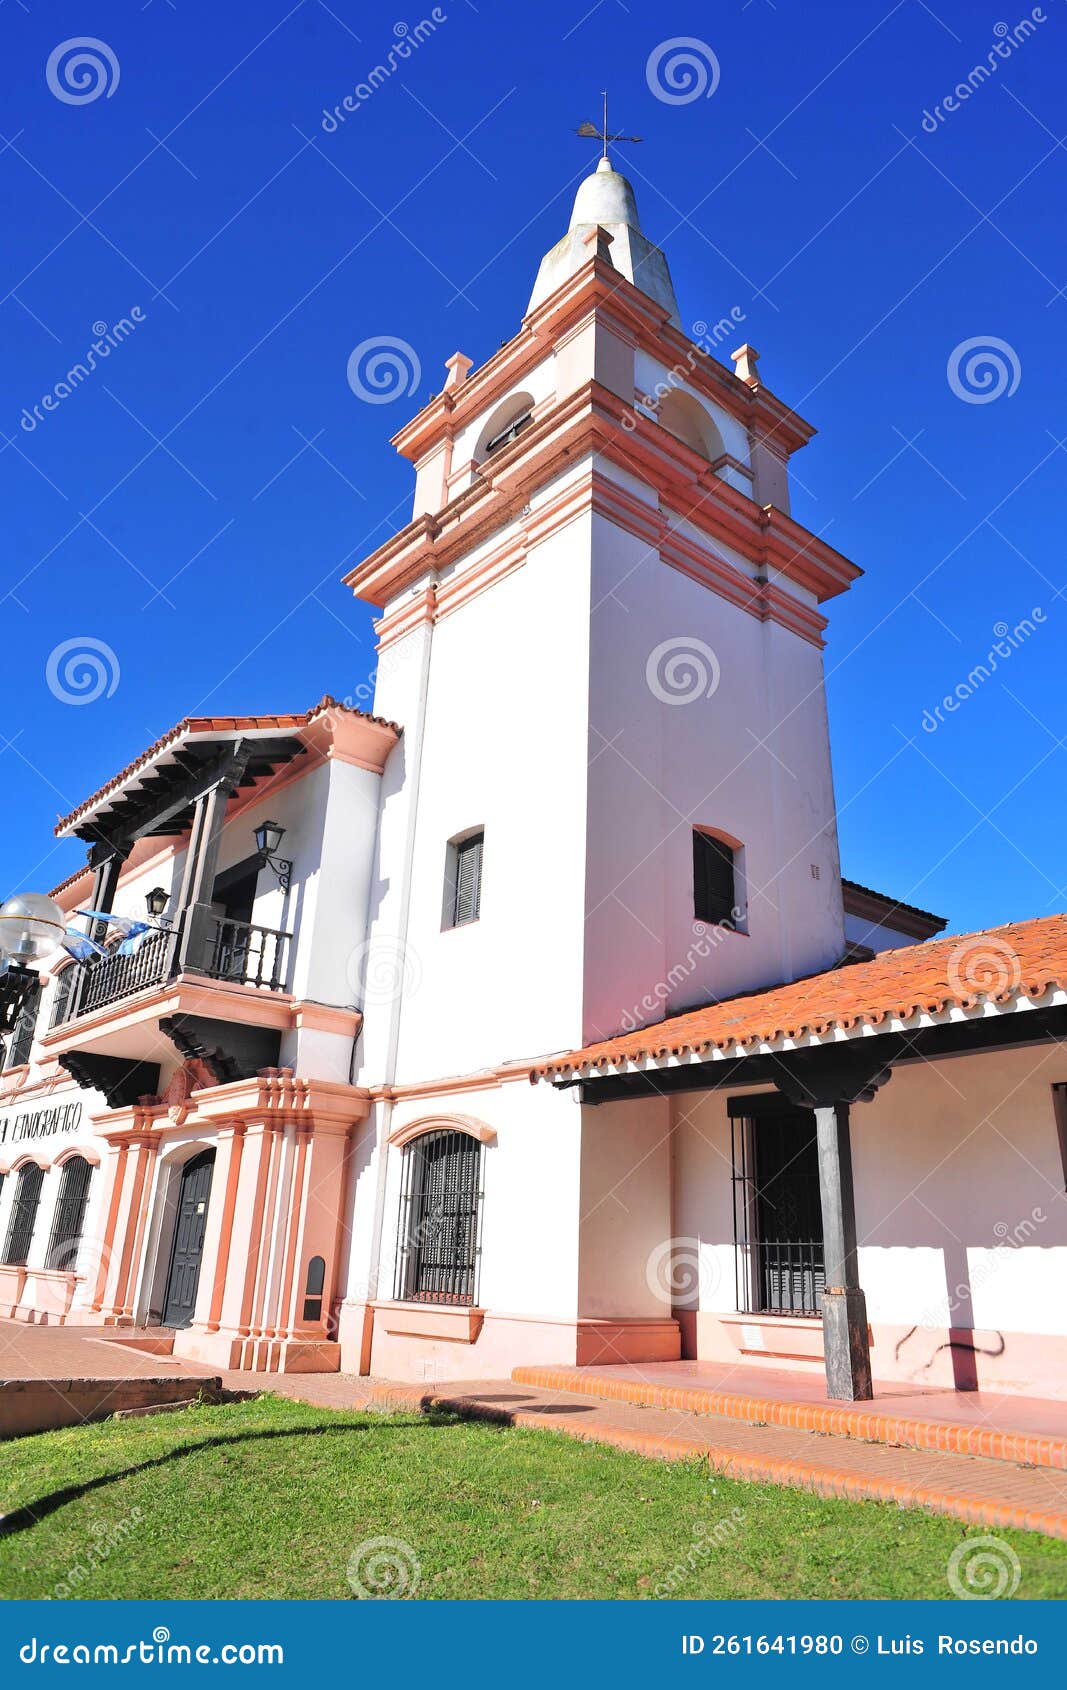 the convent of san francisco is a catholic temple and convent in the city of santa fe, argentina